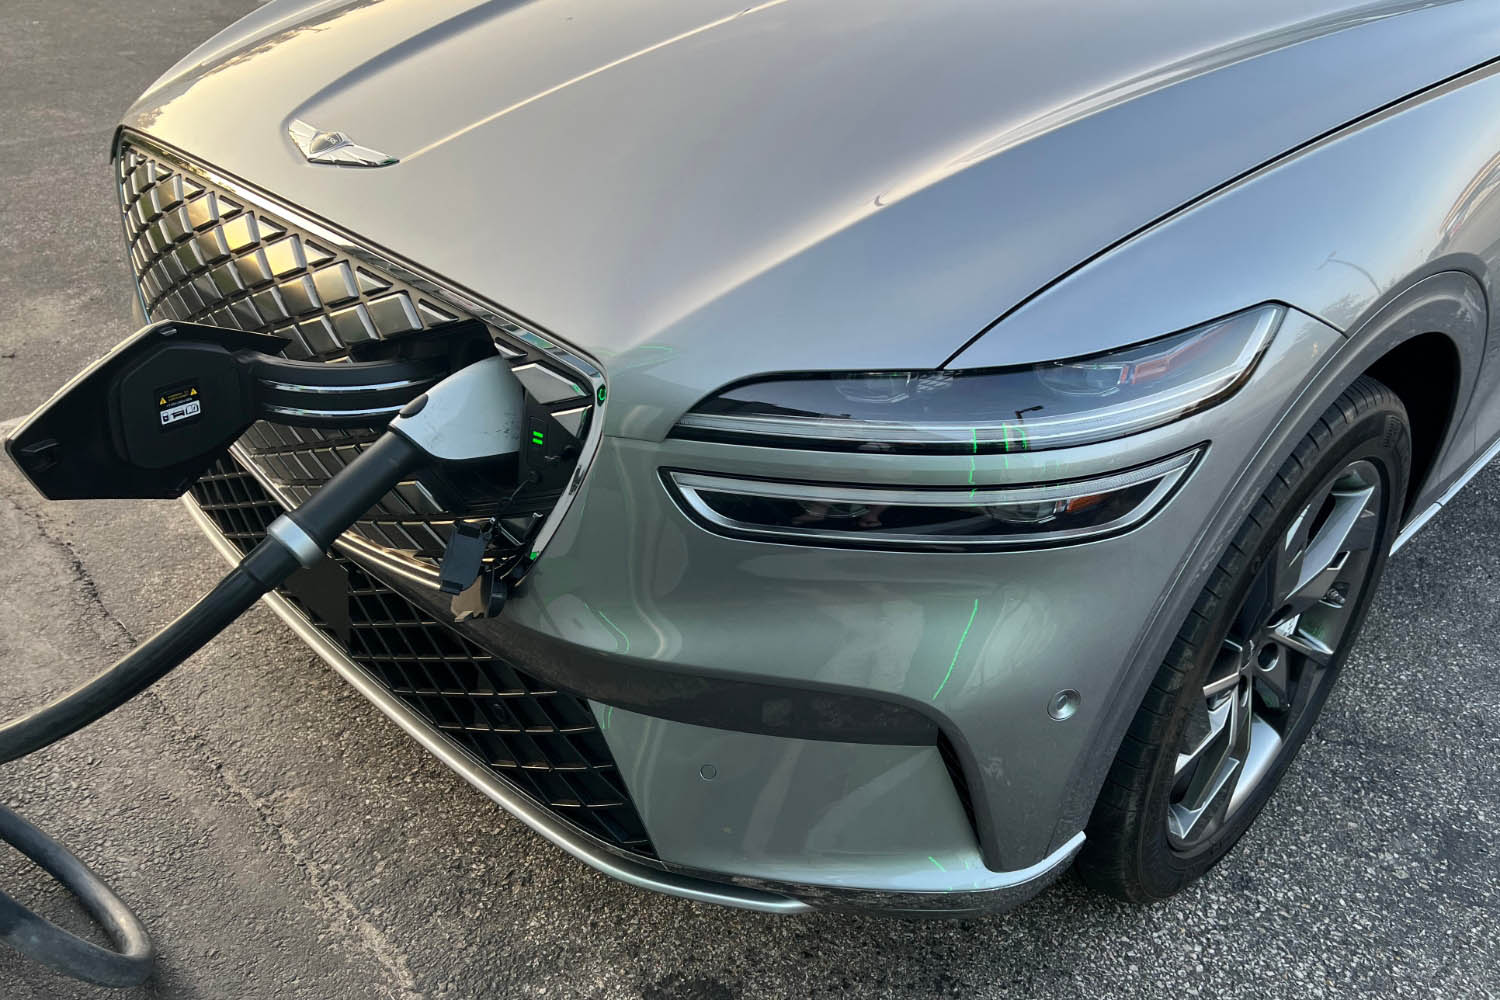 2023 Genesis Electrified GV70 in Savile Silver recharging at a station and showing the grille's hideaway charge port in its open position.